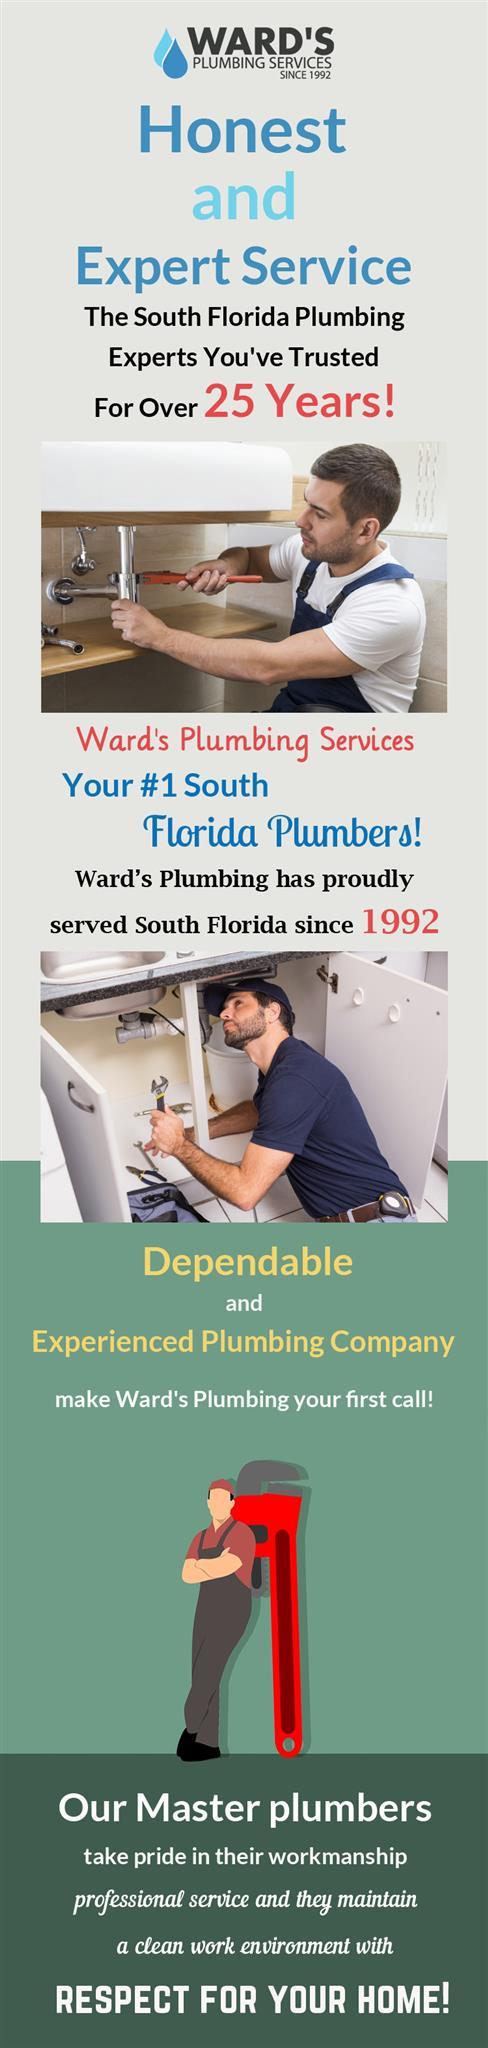 Ward’s Plumbing Services – An Experienced Plumbing Company in West Palm Beach, FL